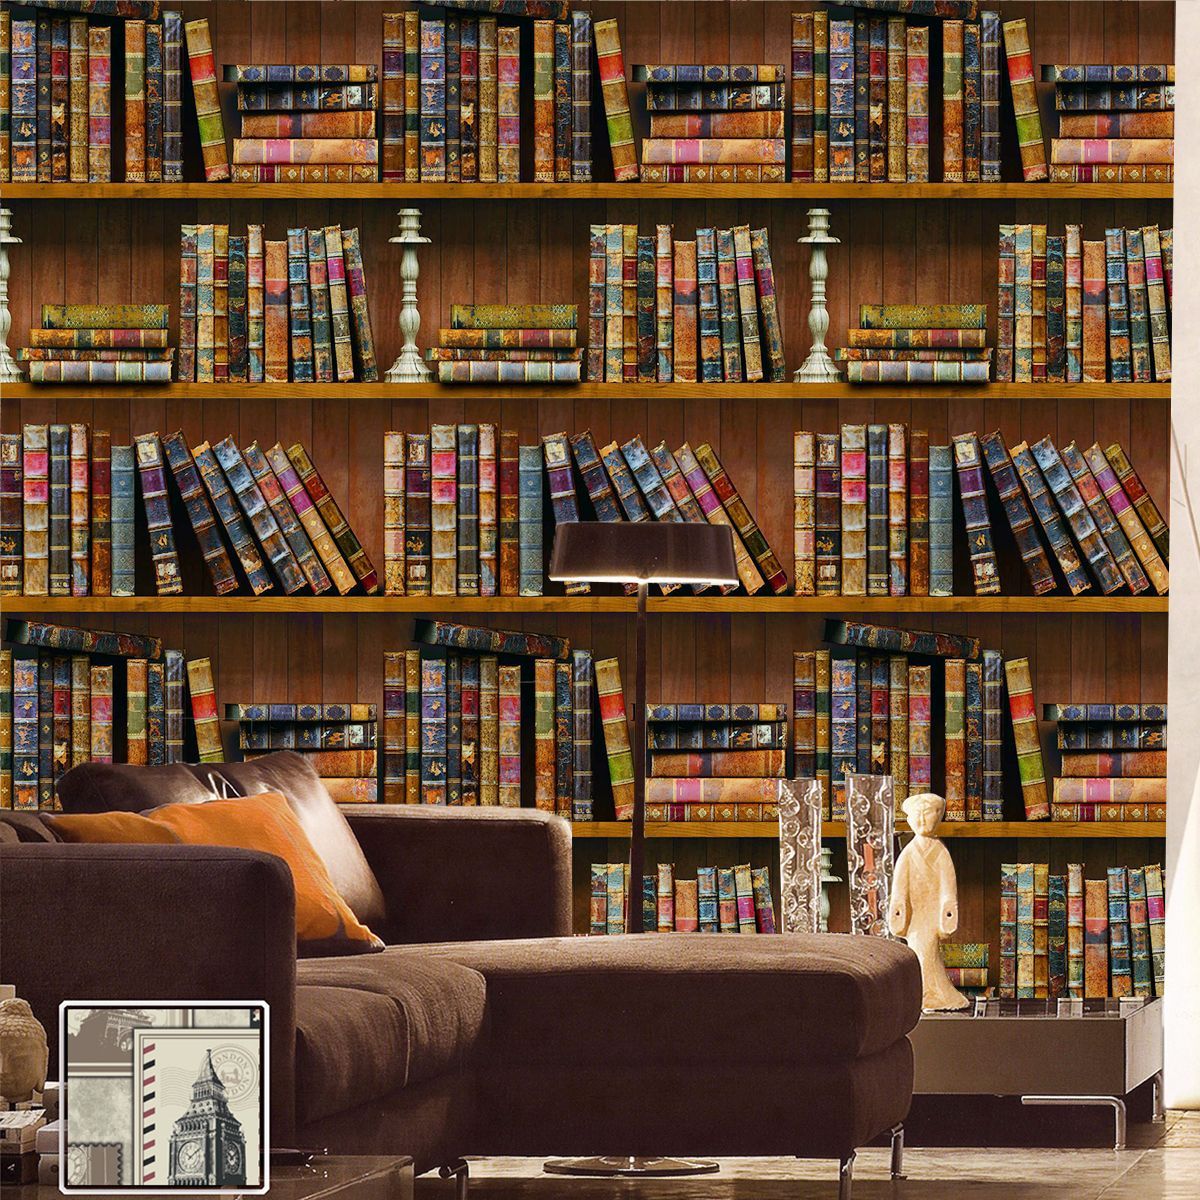 45cmx10m-Self-adhesive-Bookshelf-Library-Book-Pattern-Wall-Paper-Mural-Decals-Living-Room-Decor-1372328